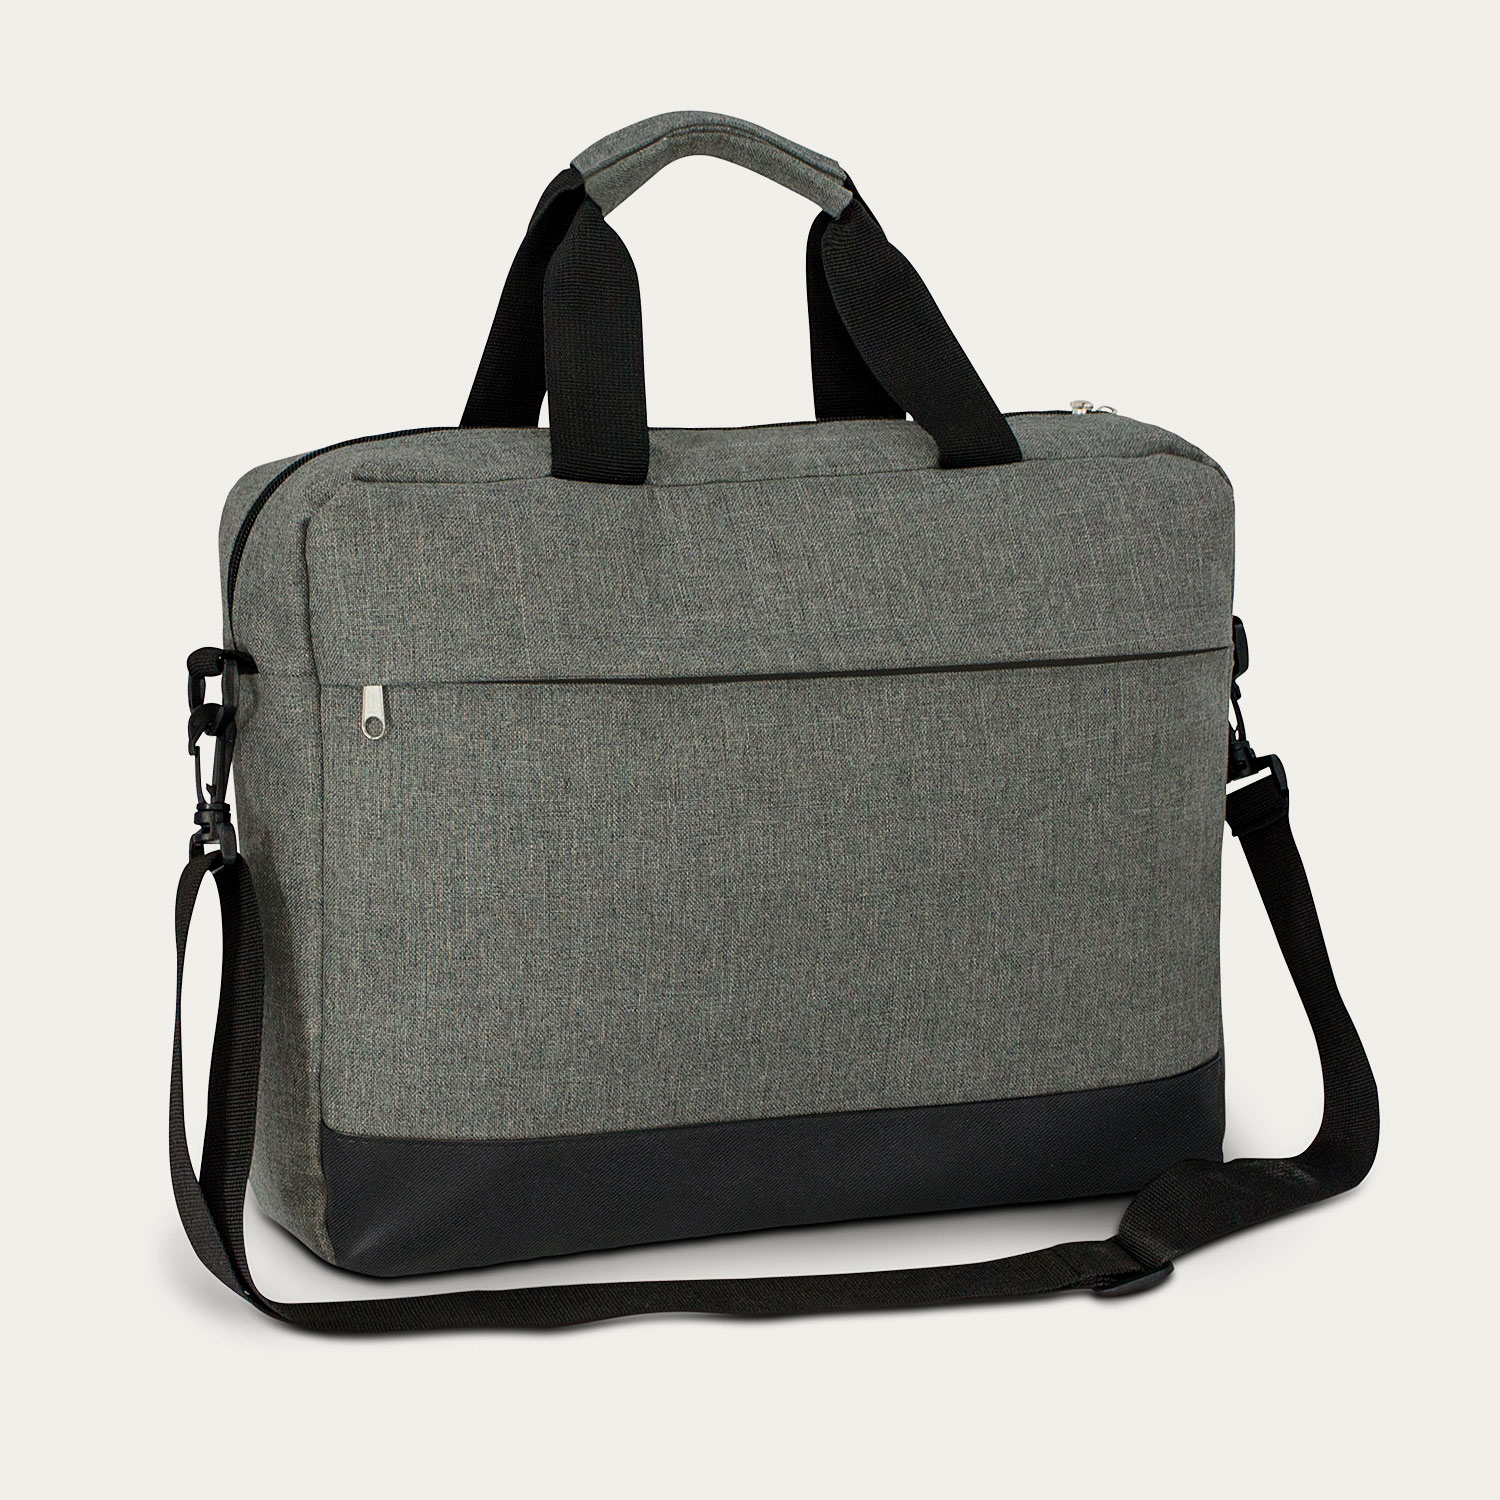 Herald Business Satchel | PrimoProducts